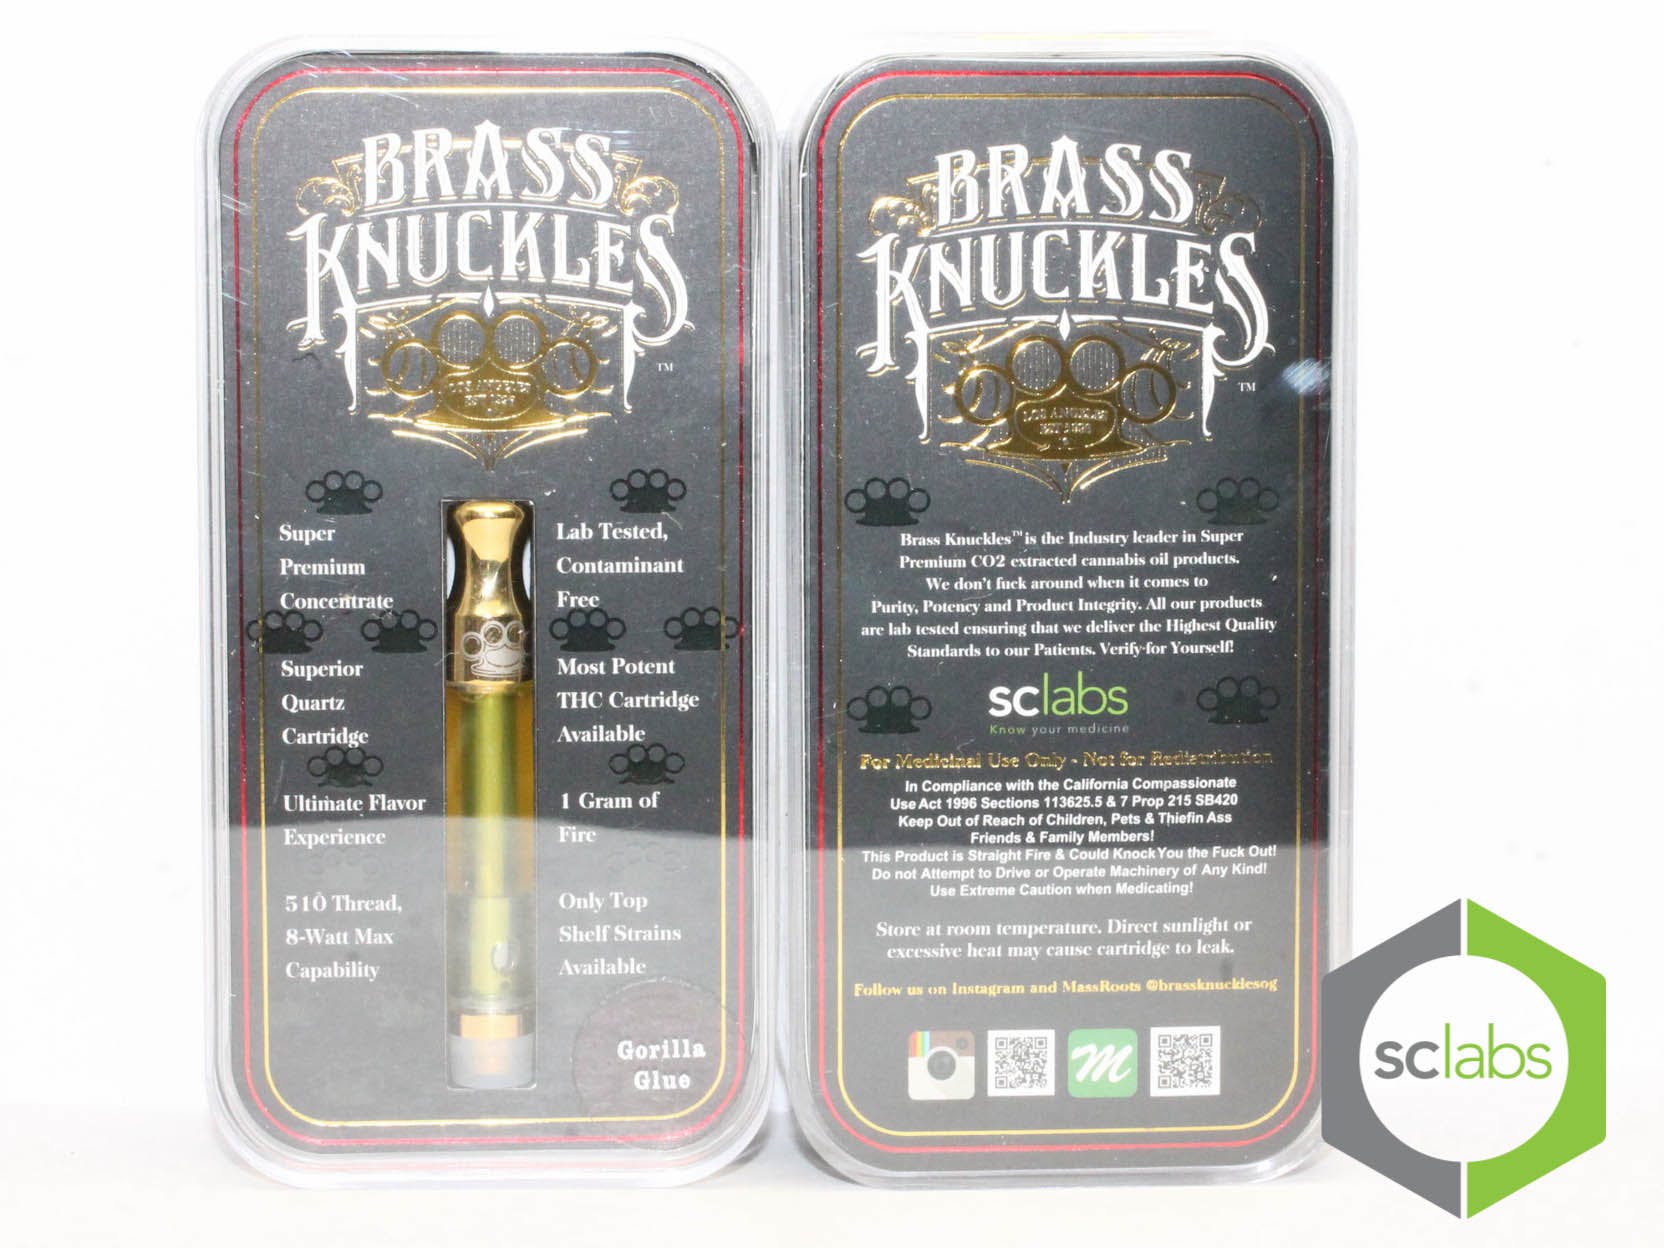 concentrate-brass-knuckles-brassknuckles-tangie